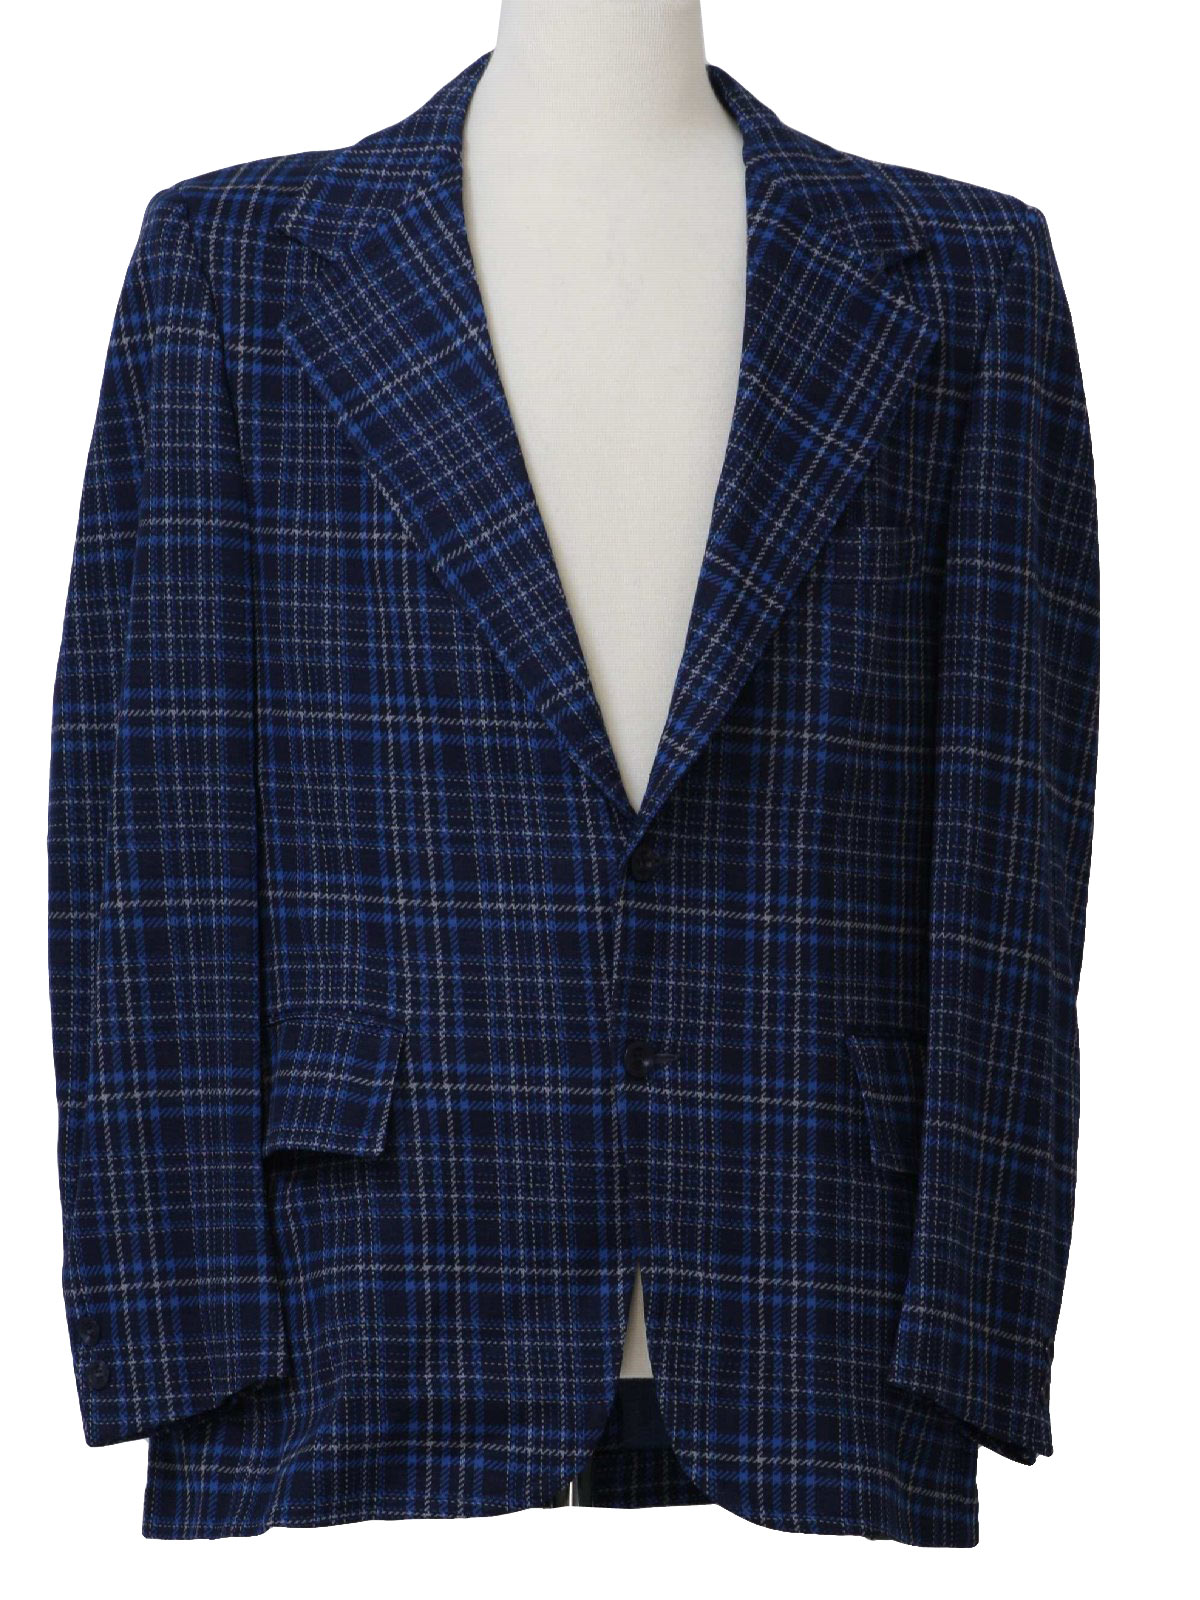 Dartmouth 70's Vintage Jacket: 70s -Dartmouth- Mens shaded blue and ...